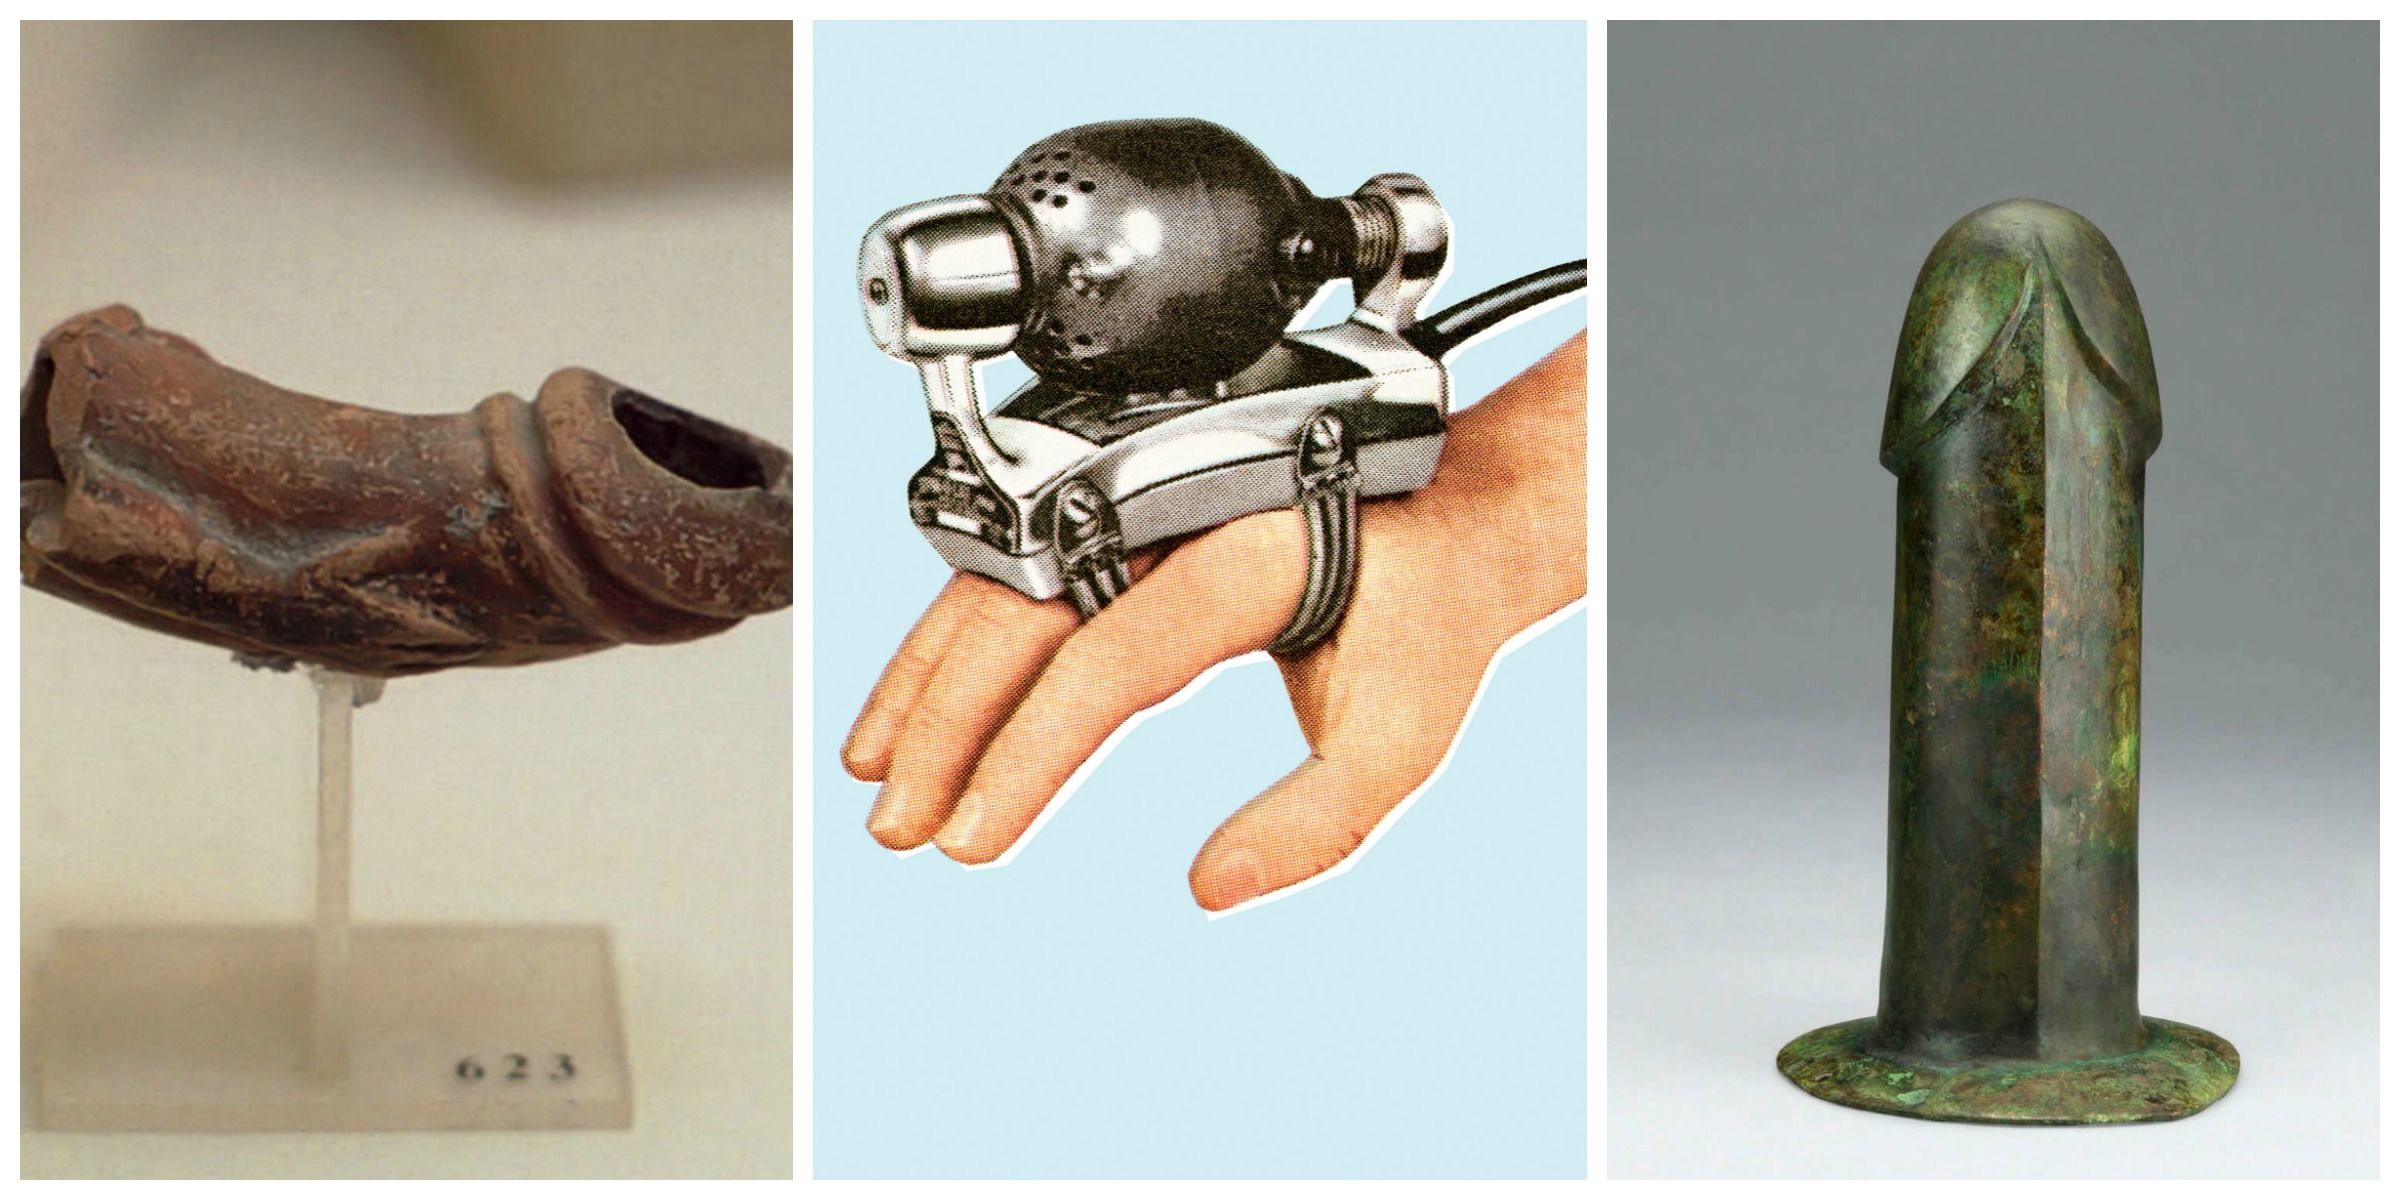 1800 Antique Little - What Sex Toys Looked Like Throughout History - Sex Toys Through History